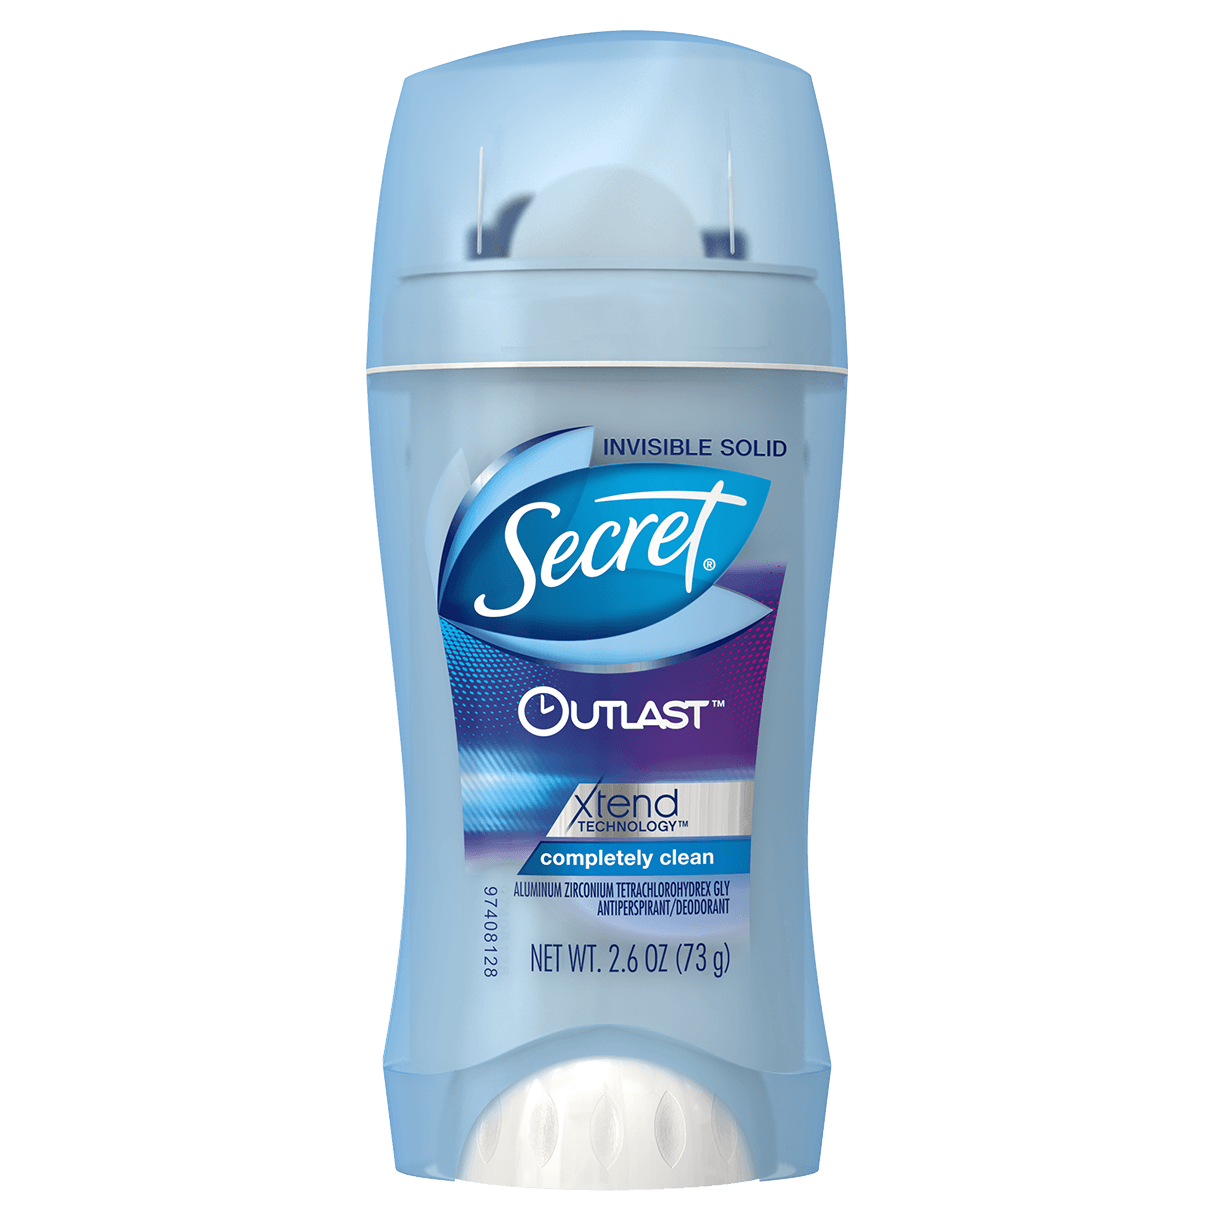 Deodorant Picture Free PNG HQ PNG Image